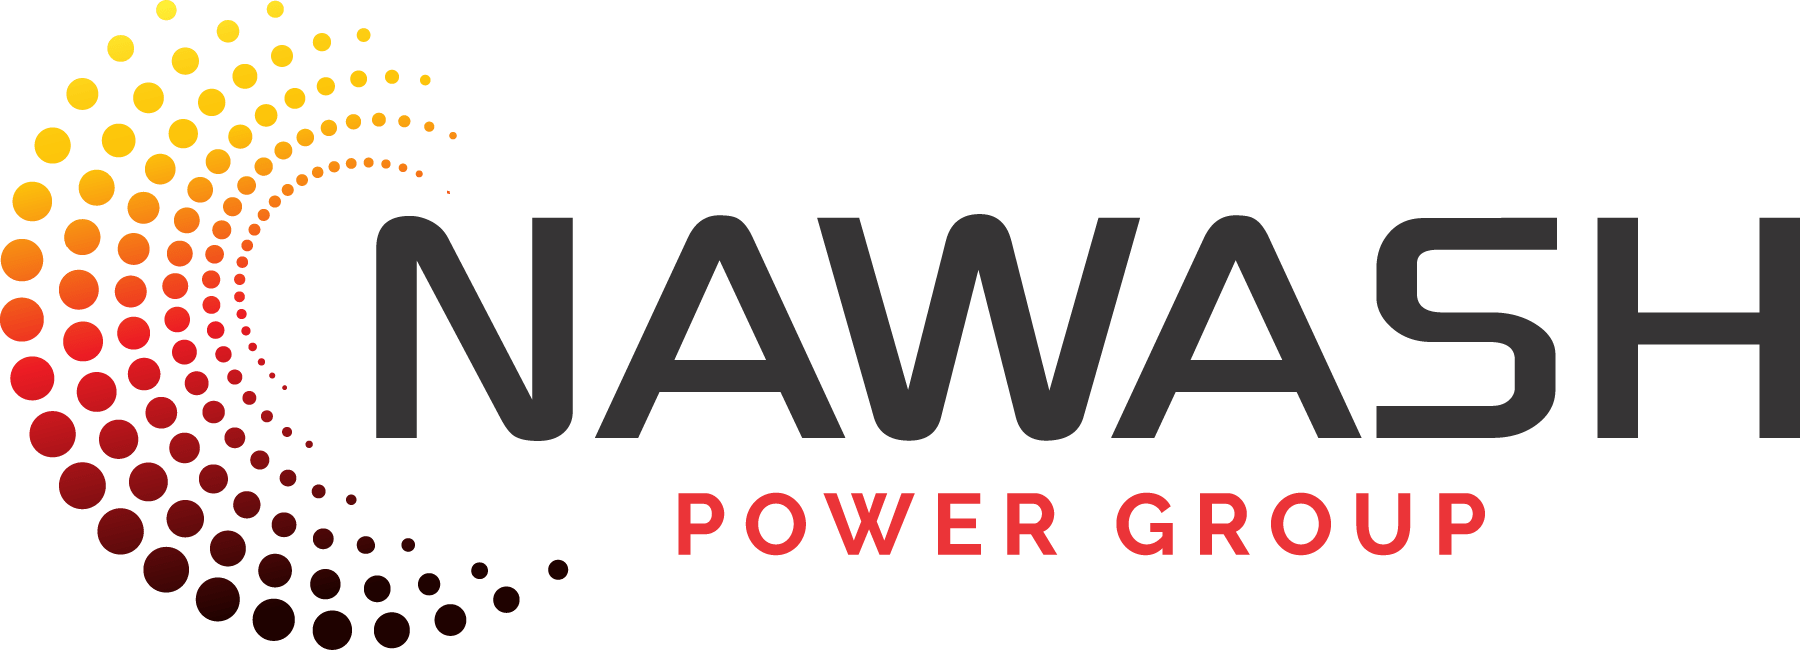 The image displays a logo consisting of the text "NAWASH POWER GROUP" with a swirling dot pattern transitioning from yellow to dark red on a green background.